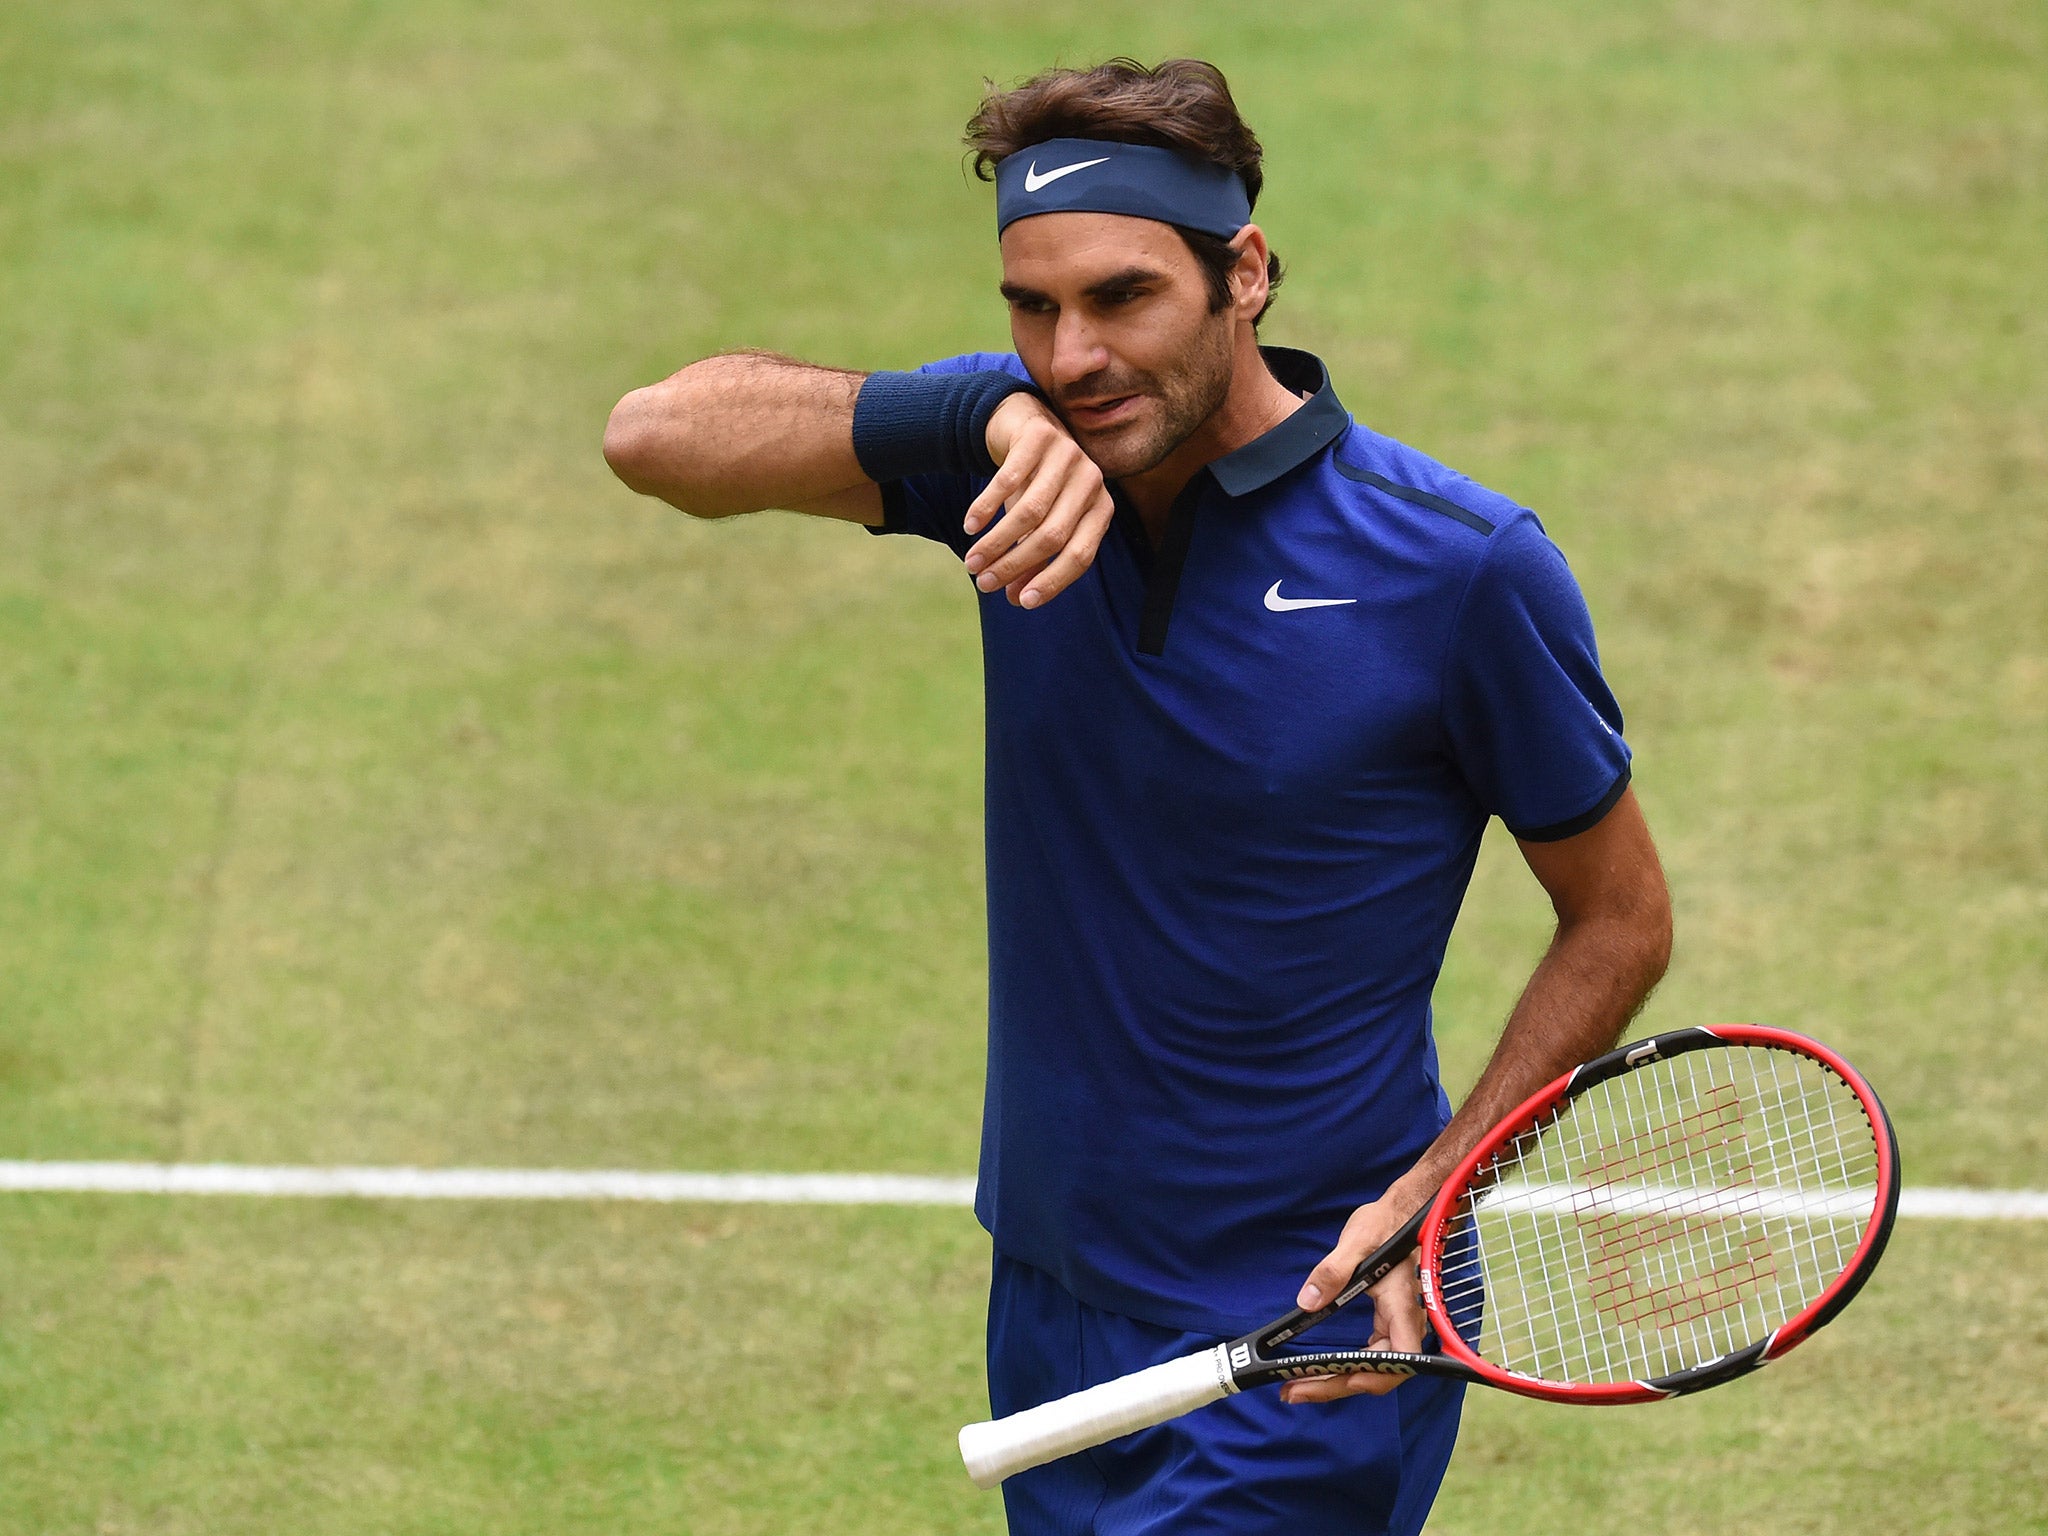 Roger Federer believes he is not among the favourites to win at Wimbledon